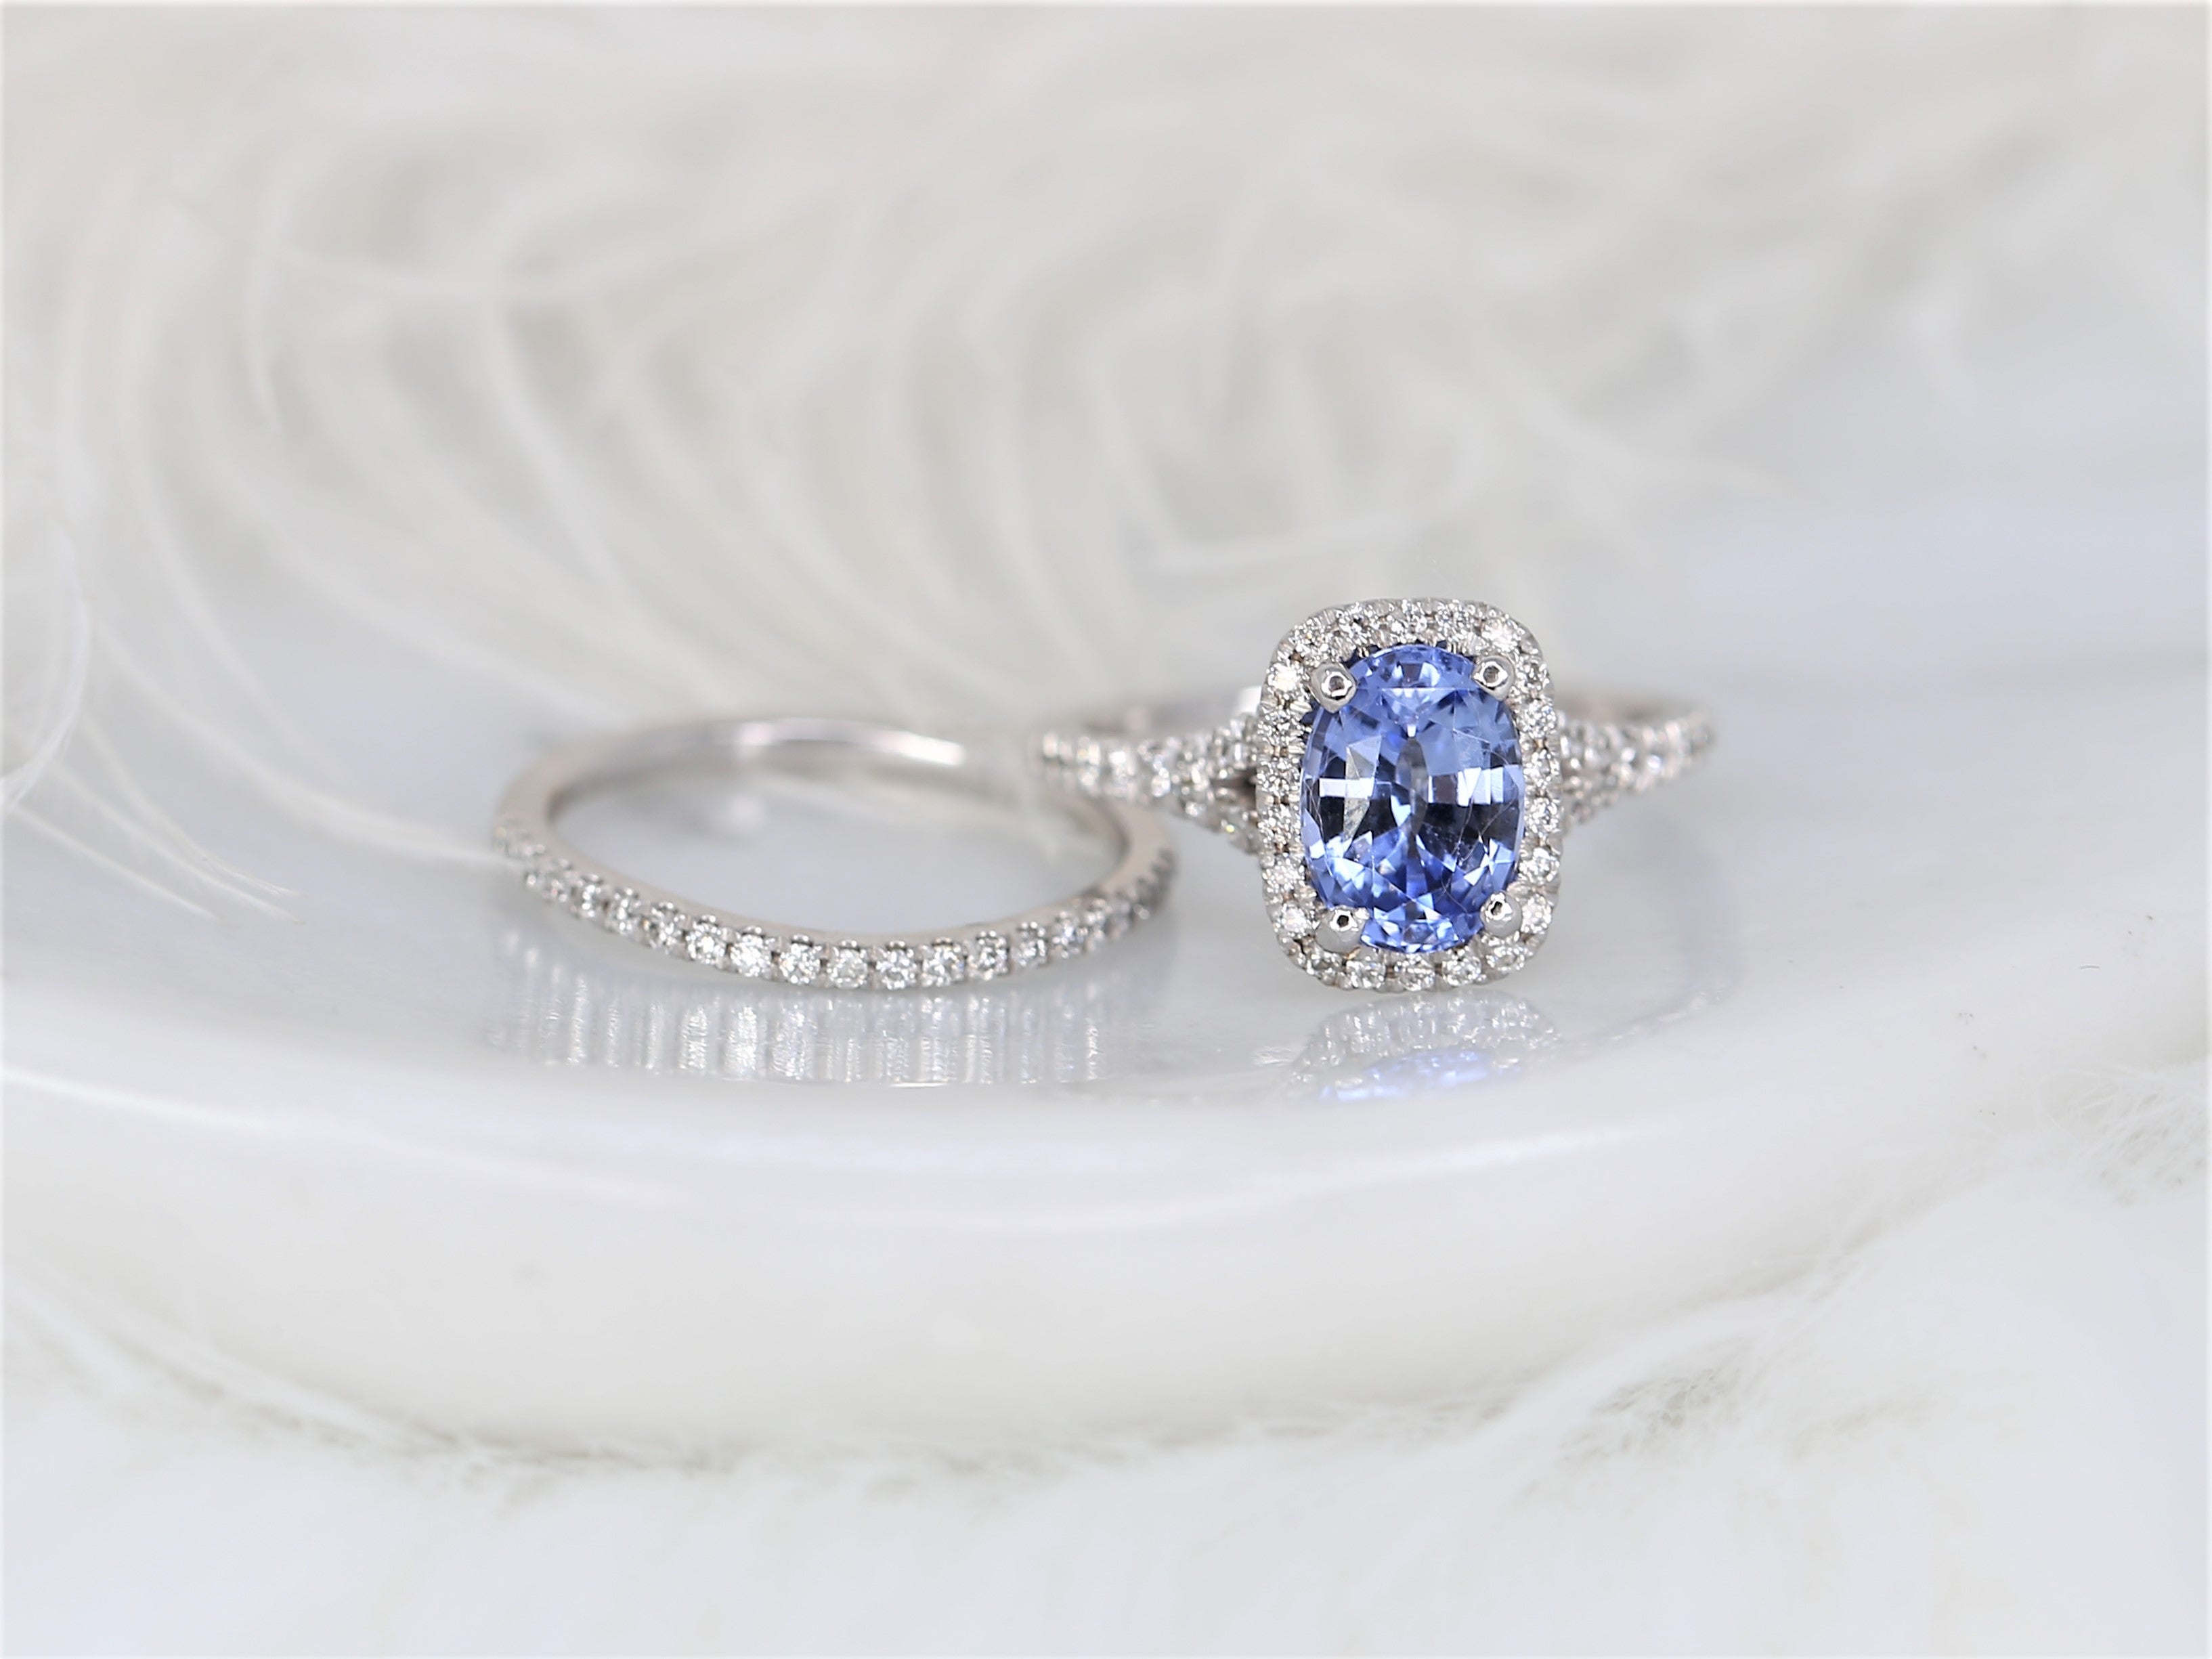 Introducing our exquisite cornflower blue sapphire halo ring set with a mesmerizing Mermaid Split Shank design. This unique bridal set showcases a stunning cornflower blue sapphire, encircled by a halo of sparkling pave diamonds. Hand-mounted by